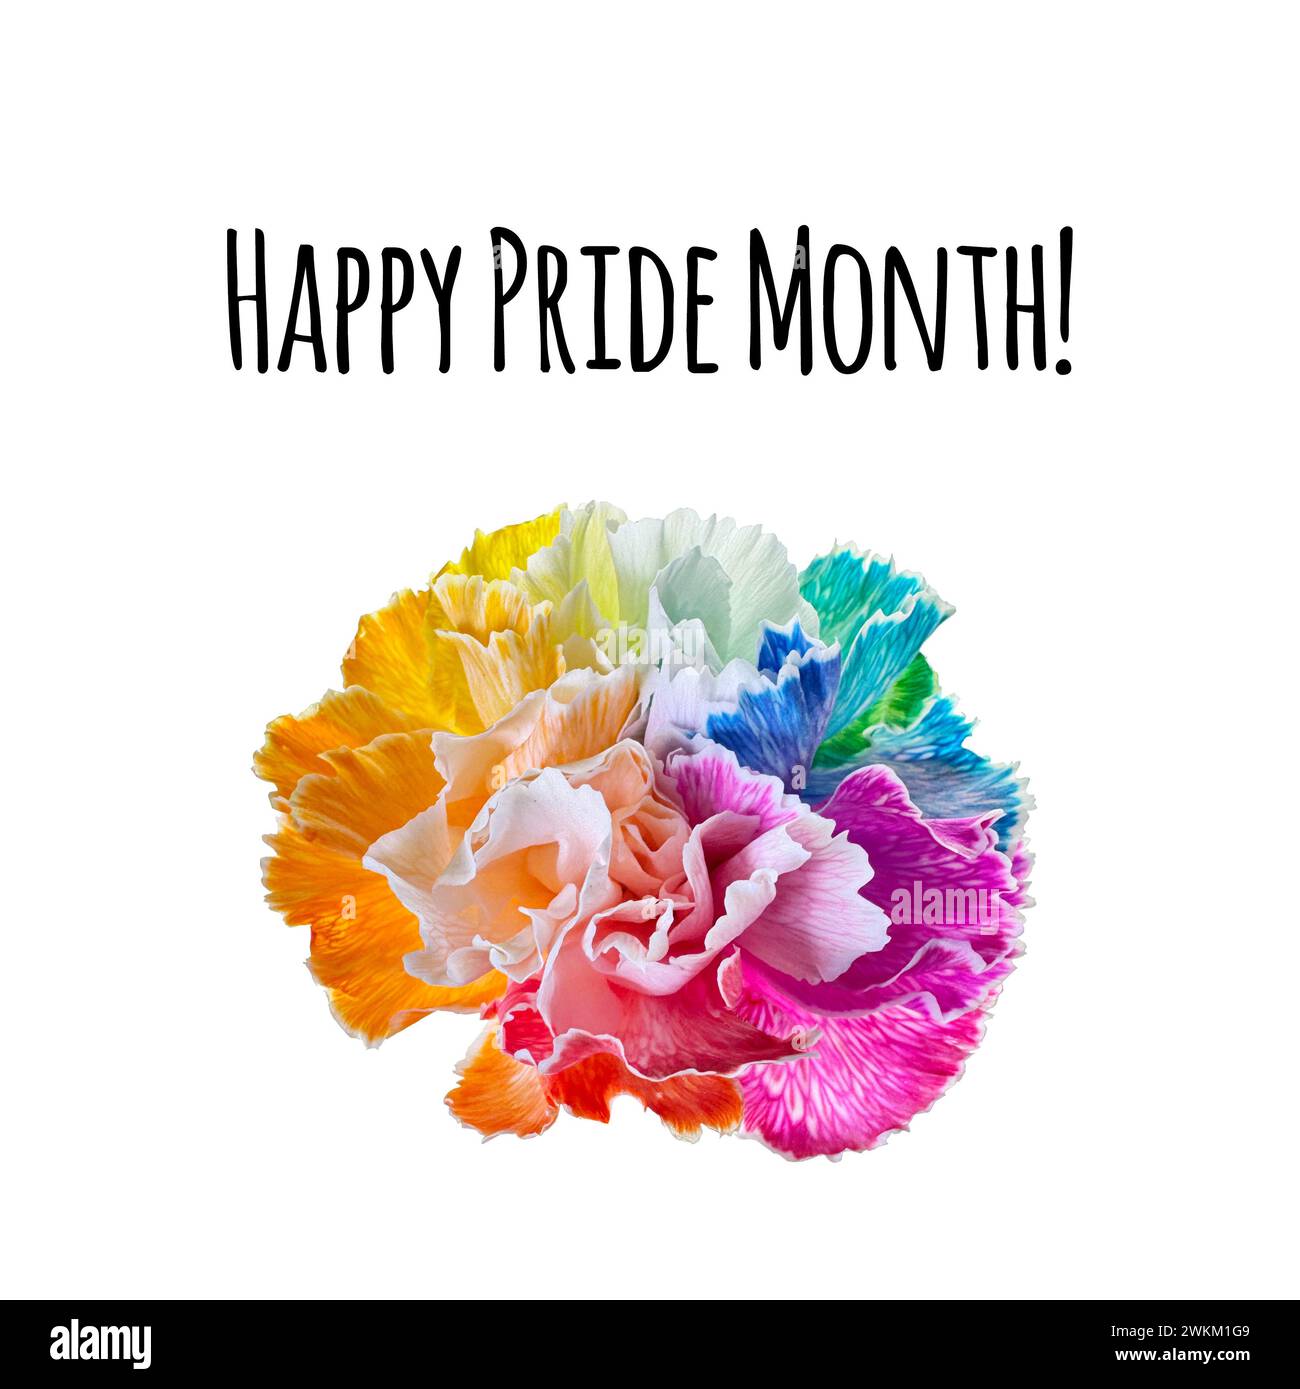 Rainbow Colored Carnation With Happy Pride Month Text Stock Photo